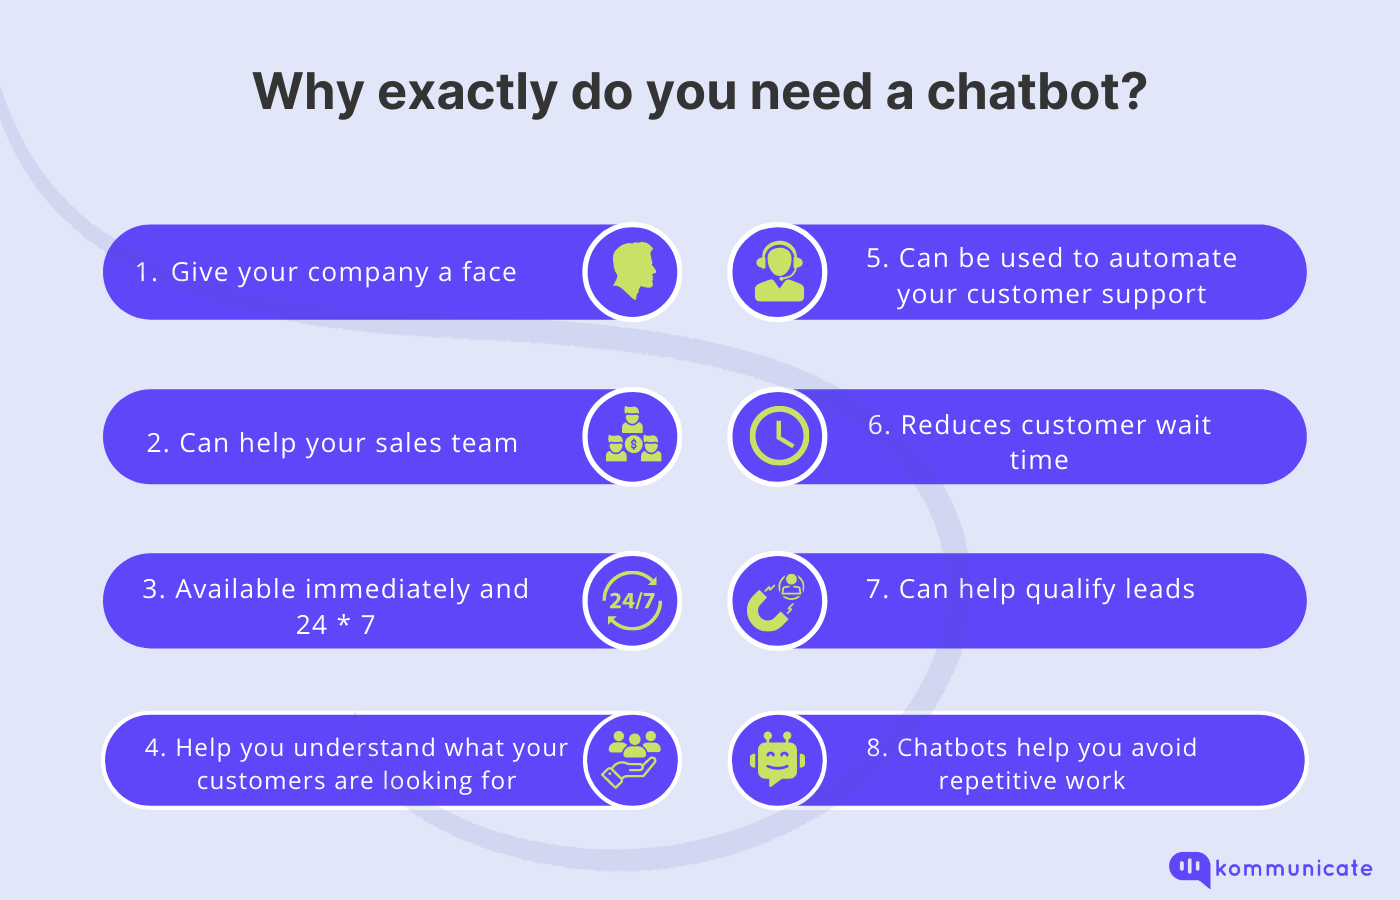 Why exactly do you need a chatbot?